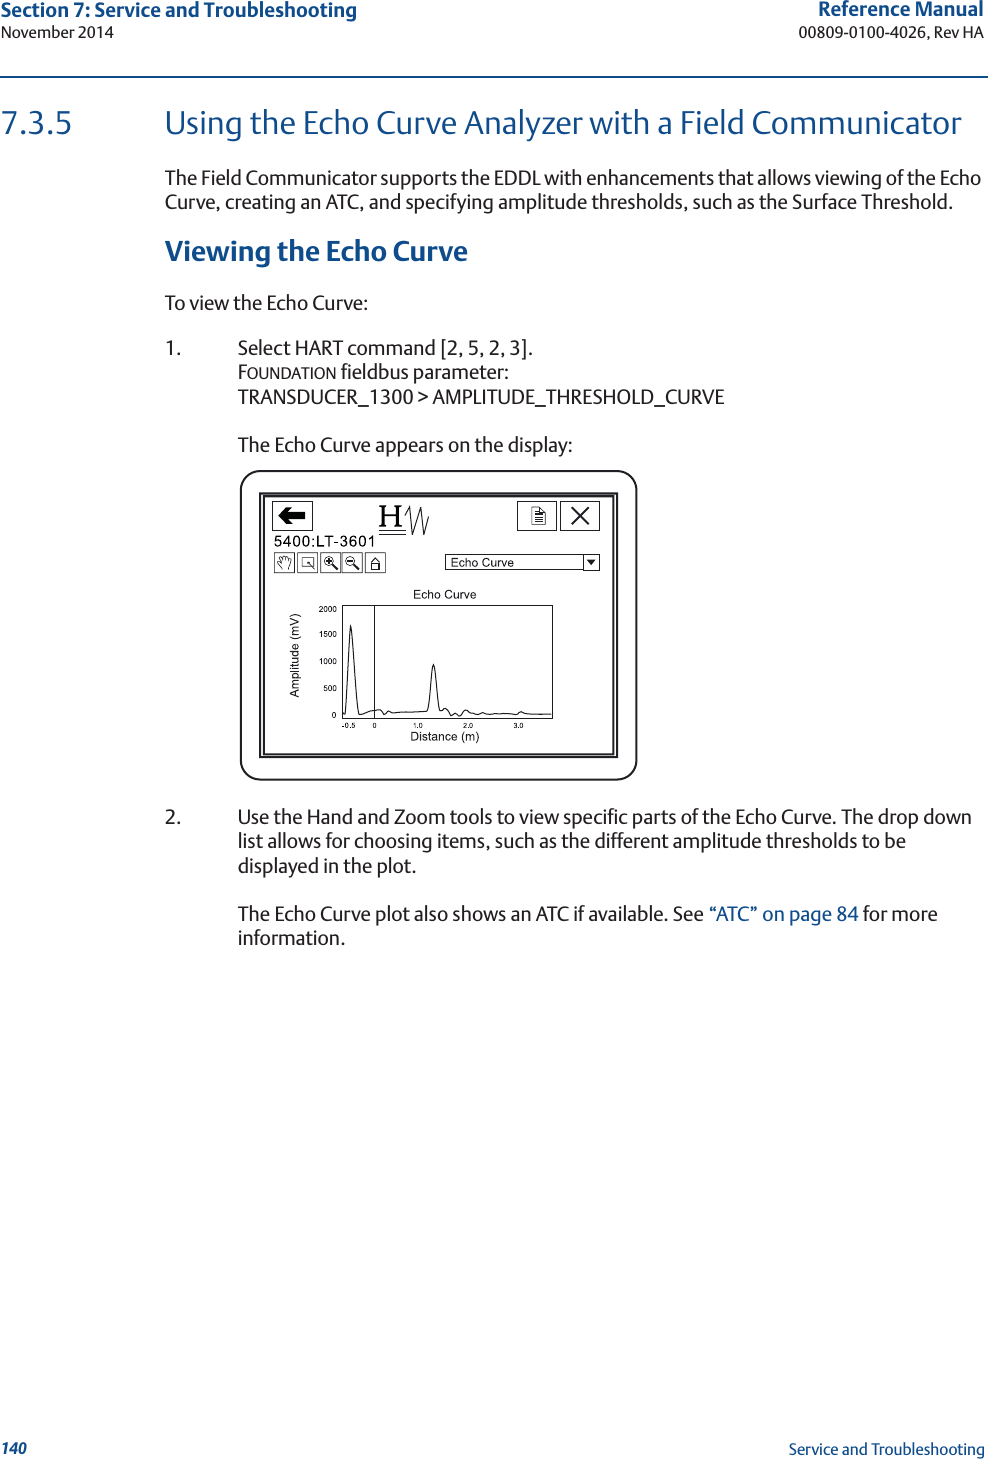 140Reference Manual00809-0100-4026, Rev HASection 7: Service and TroubleshootingNovember 2014Service and Troubleshooting7.3.5 Using the Echo Curve Analyzer with a Field CommunicatorThe Field Communicator supports the EDDL with enhancements that allows viewing of the Echo Curve, creating an ATC, and specifying amplitude thresholds, such as the Surface Threshold.Viewing the Echo CurveTo view the Echo Curve:1. Select HART command [2, 5, 2, 3].FOUNDATION fieldbus parameter:TRANSDUCER_1300 &gt; AMPLITUDE_THRESHOLD_CURVEThe Echo Curve appears on the display:2. Use the Hand and Zoom tools to view specific parts of the Echo Curve. The drop down list allows for choosing items, such as the different amplitude thresholds to be displayed in the plot.The Echo Curve plot also shows an ATC if available. See “ATC” on page 84 for more information.